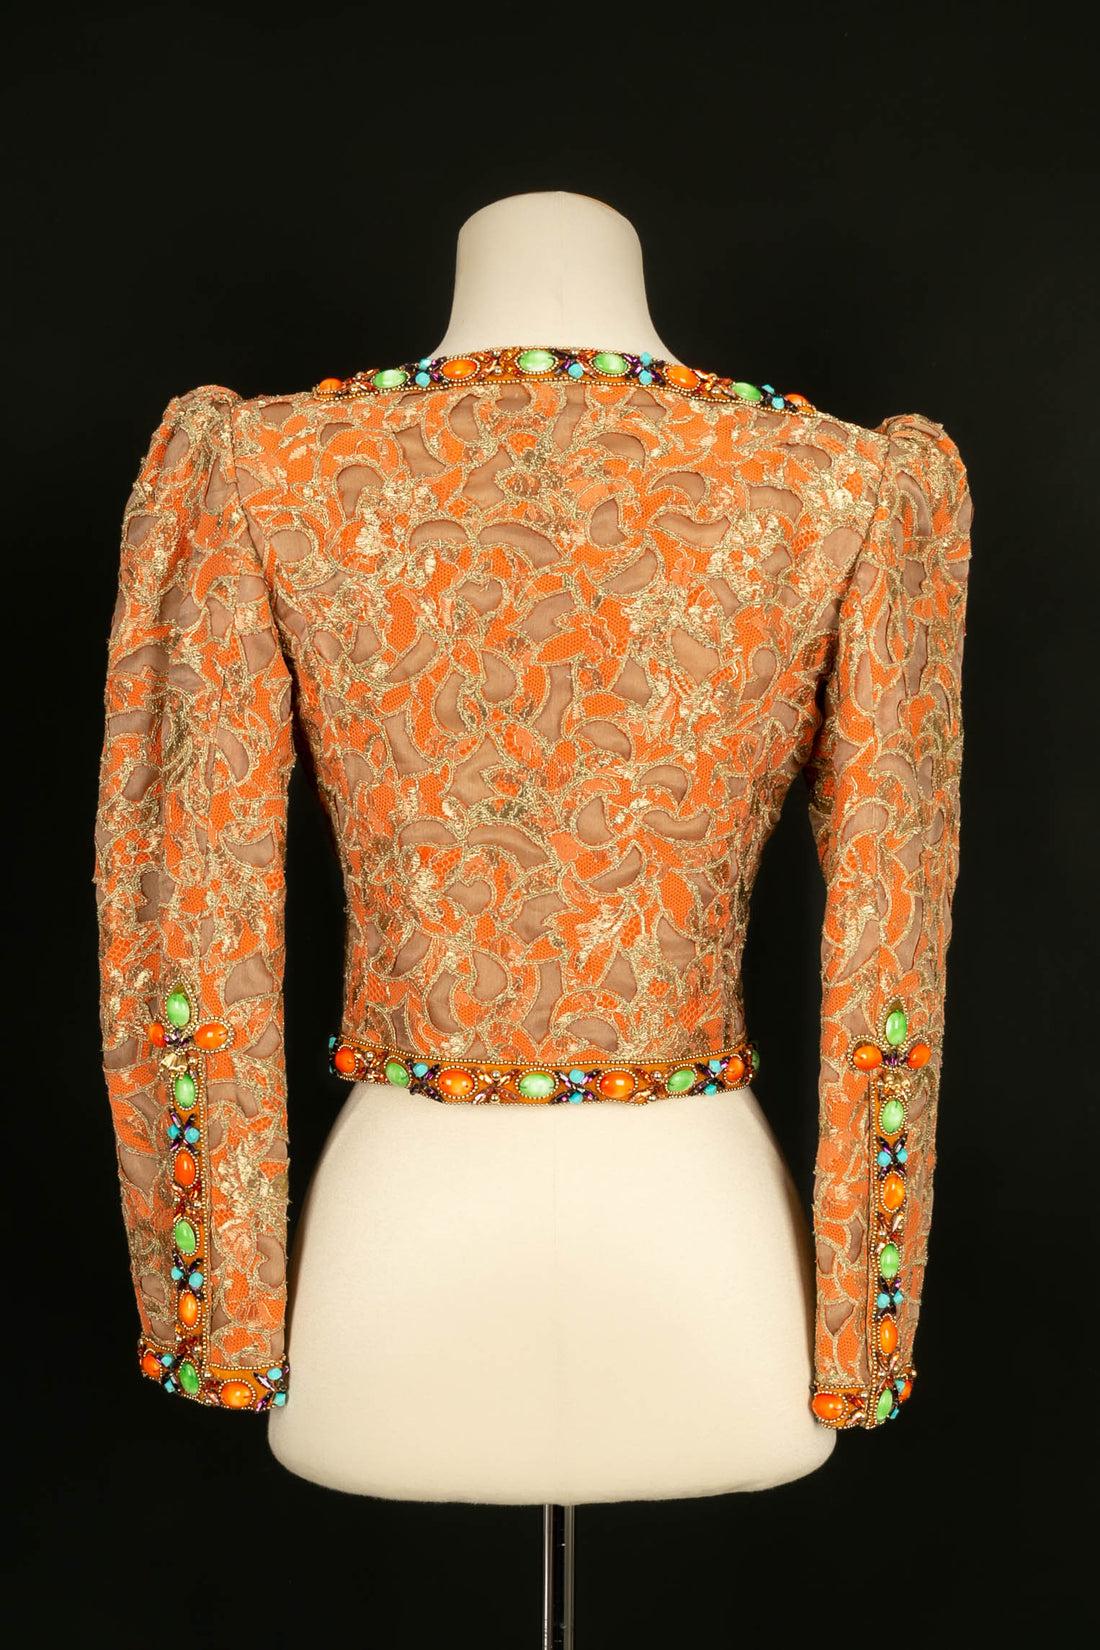 Ungaro Haute Embroidered with Flowers, Beads and Rhinestones Couture Set For Sale 11